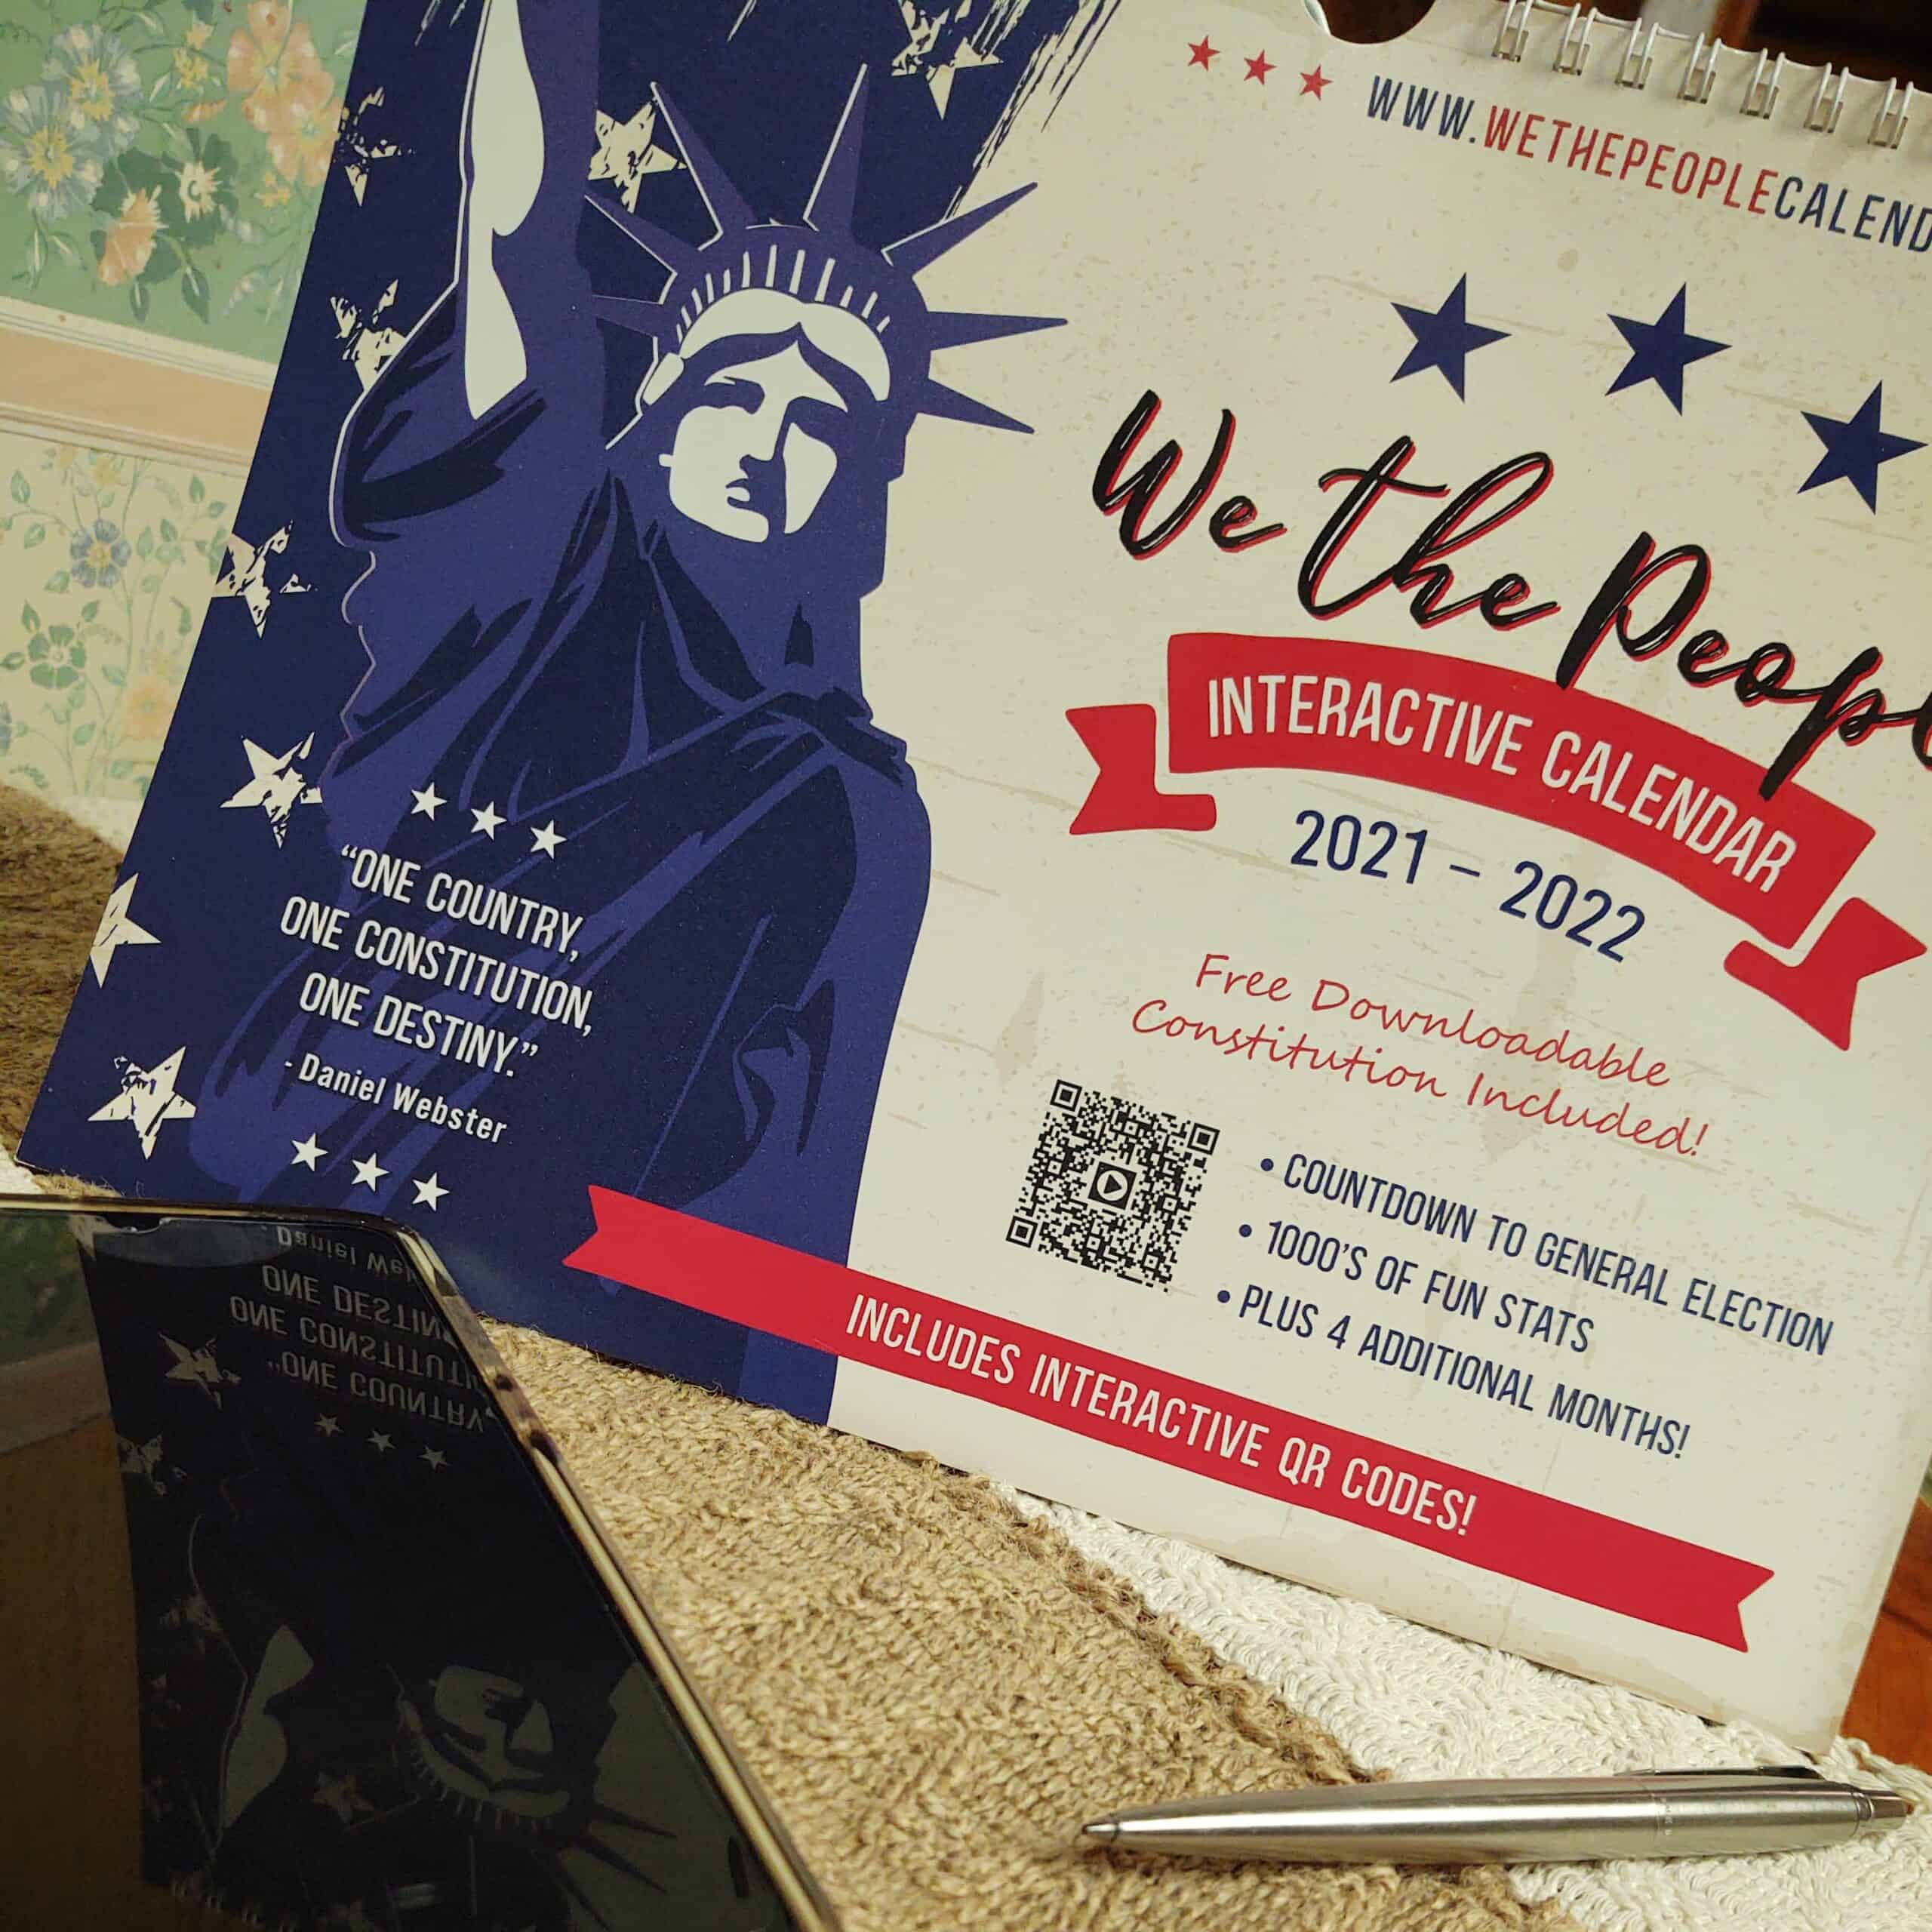 We The People 2022 Interactive Calendar SHOP AT THE PAMPHLET